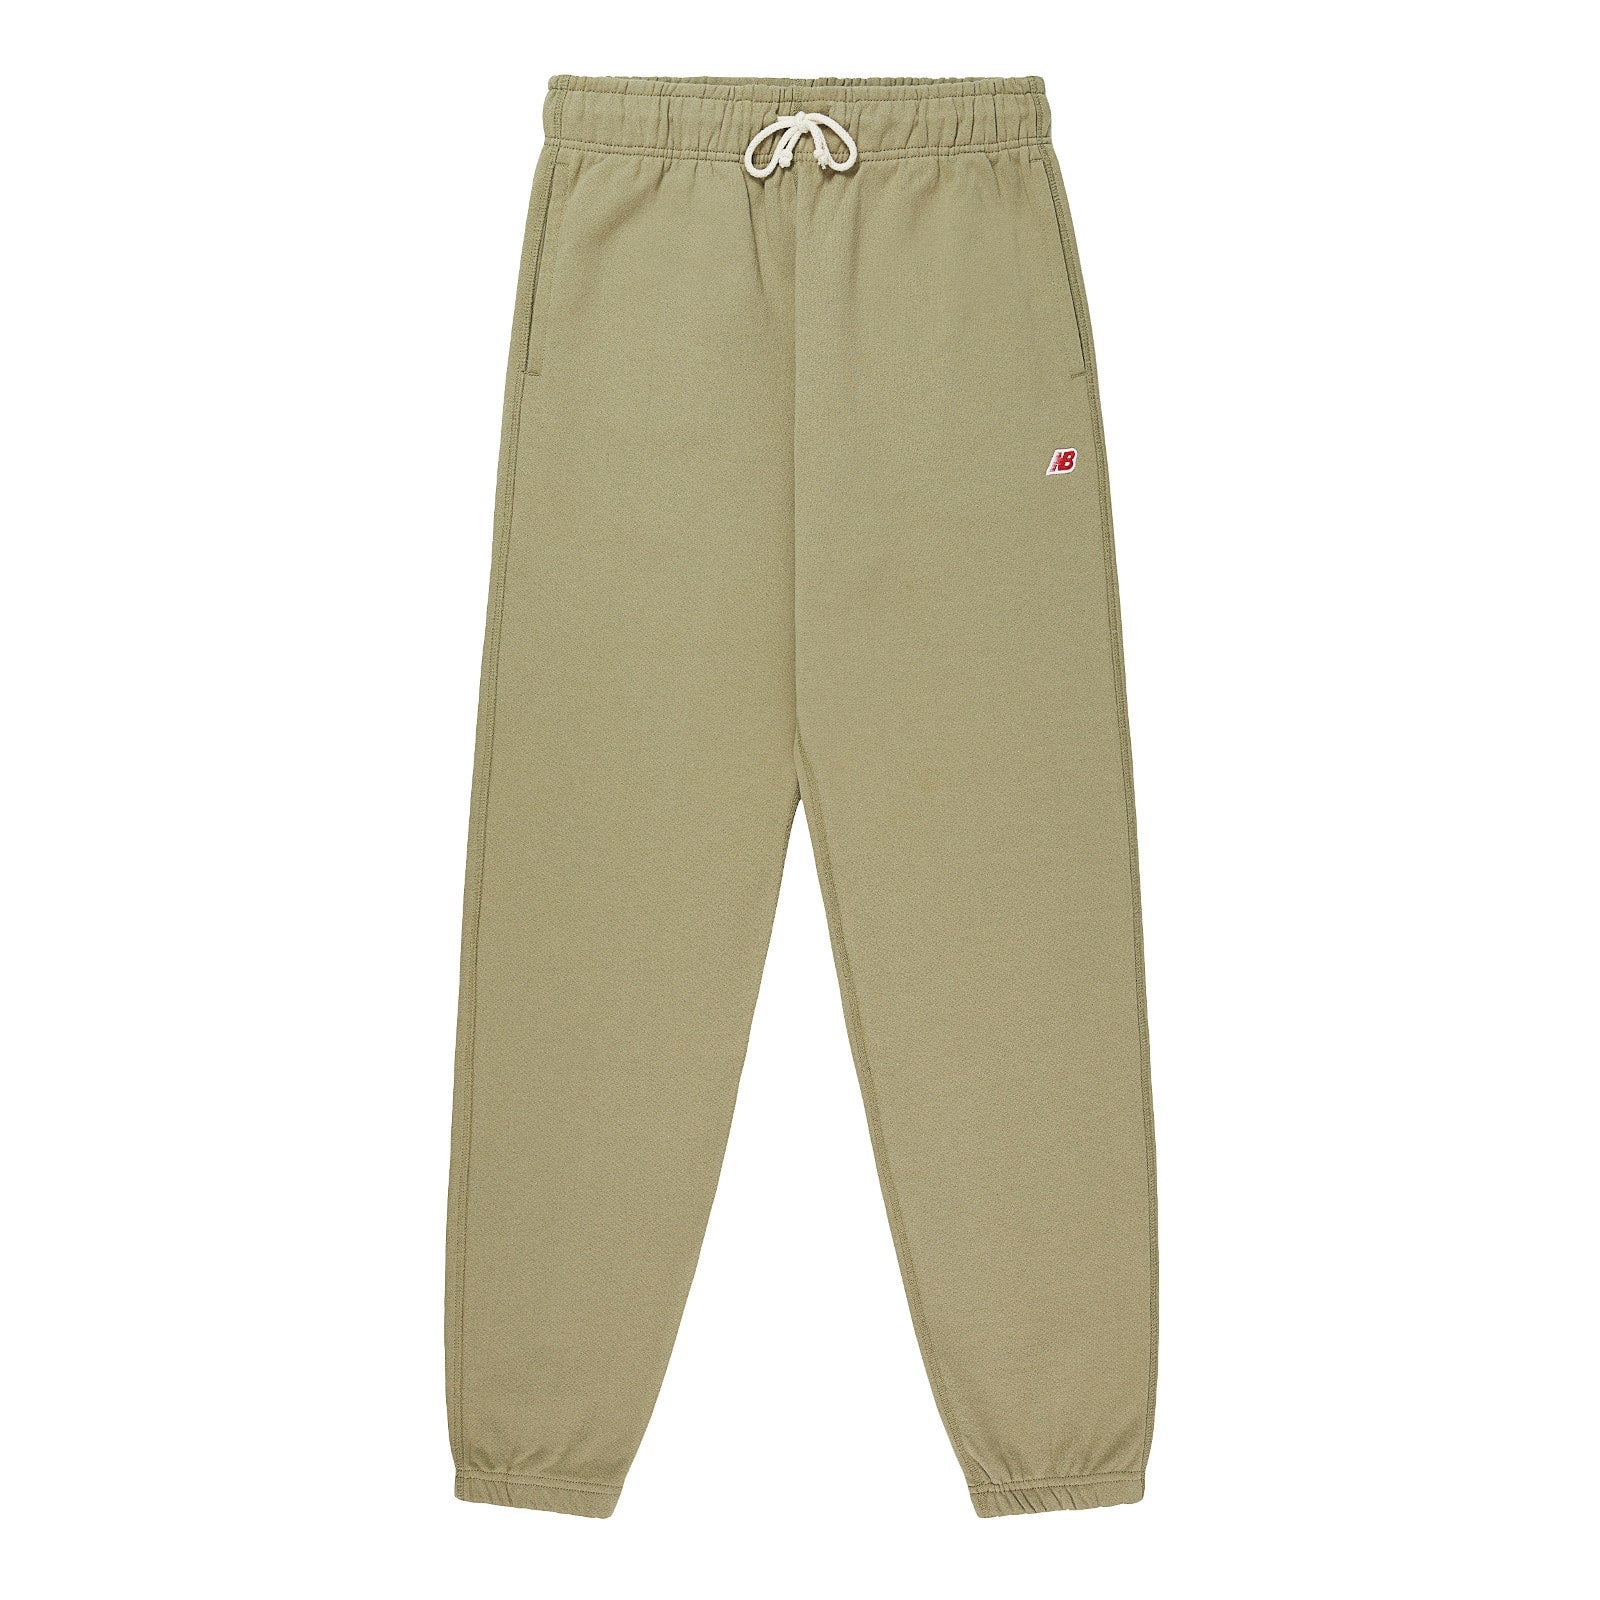 NB公式】ニューバランス | MADE in USA Core Sweatpant|New Balance ...